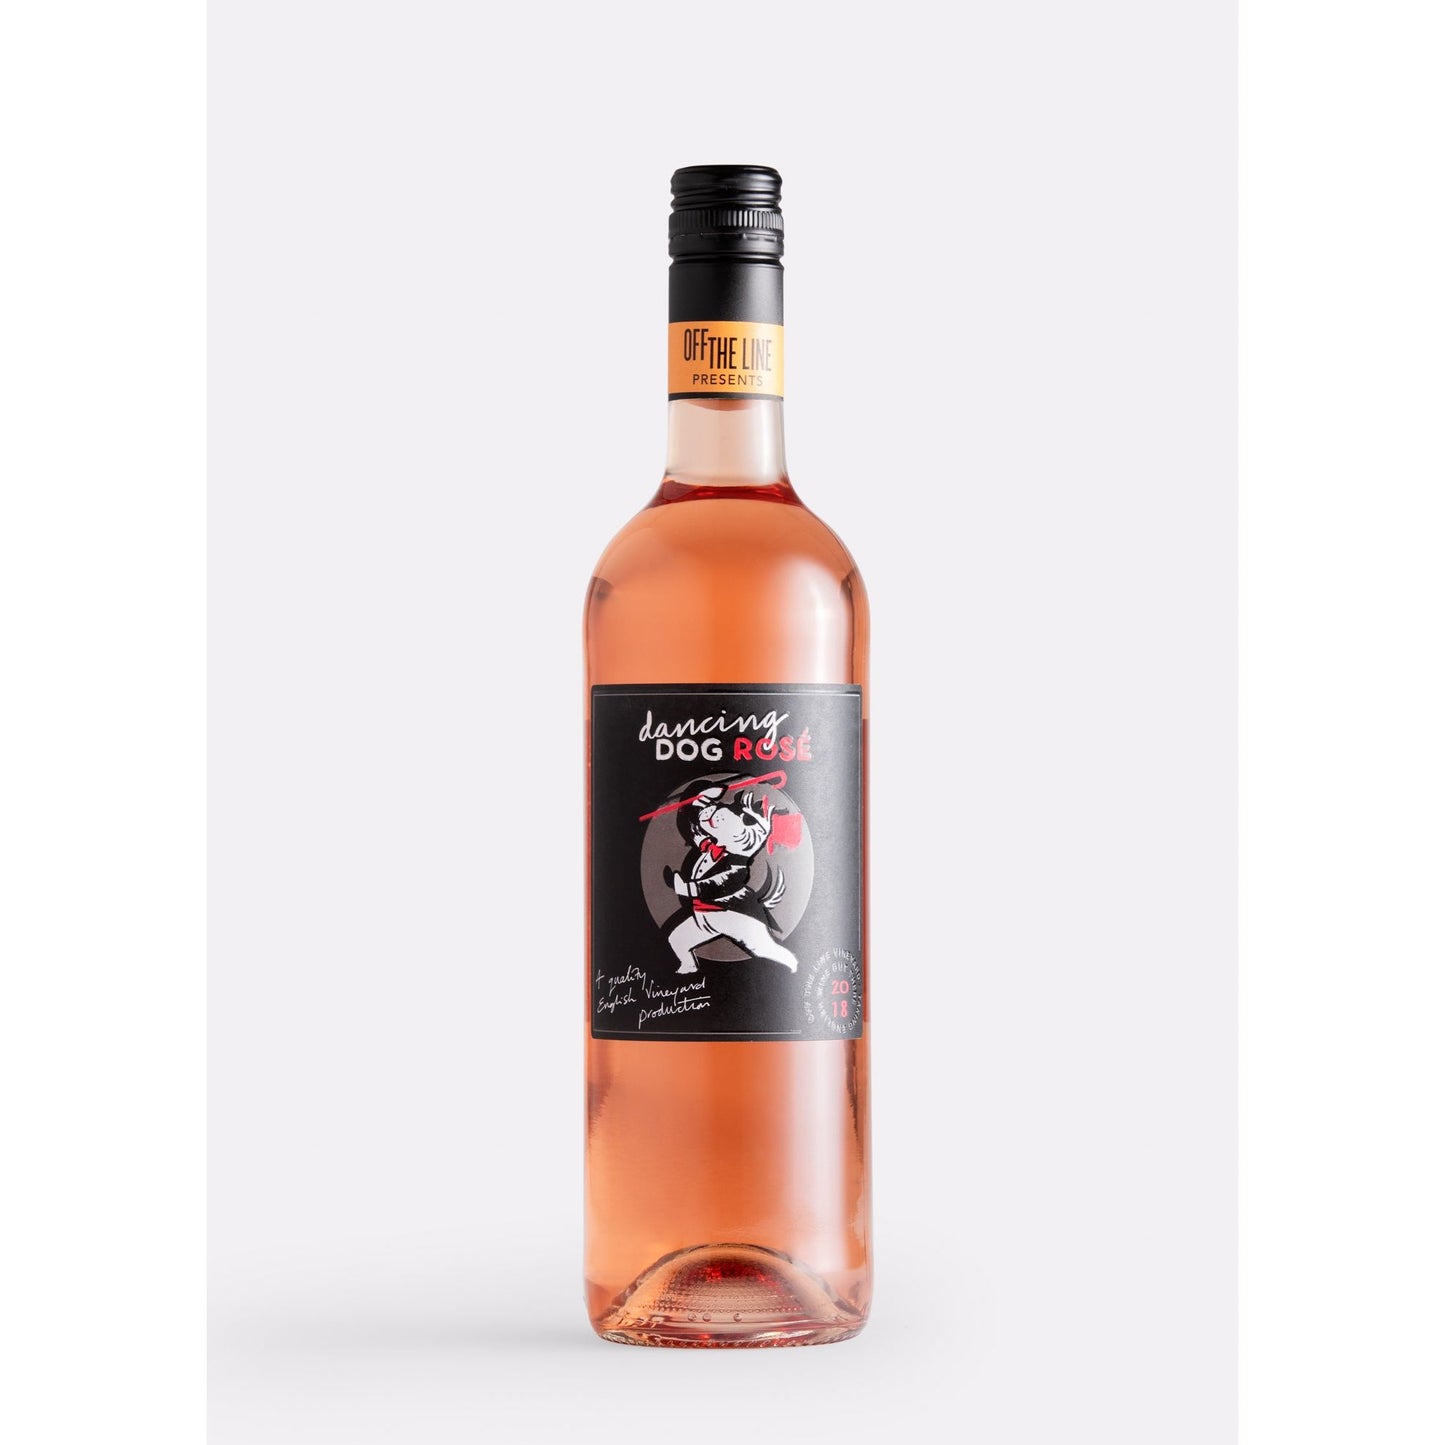 Off The Line Dancing Dog Rosé English rose wine 